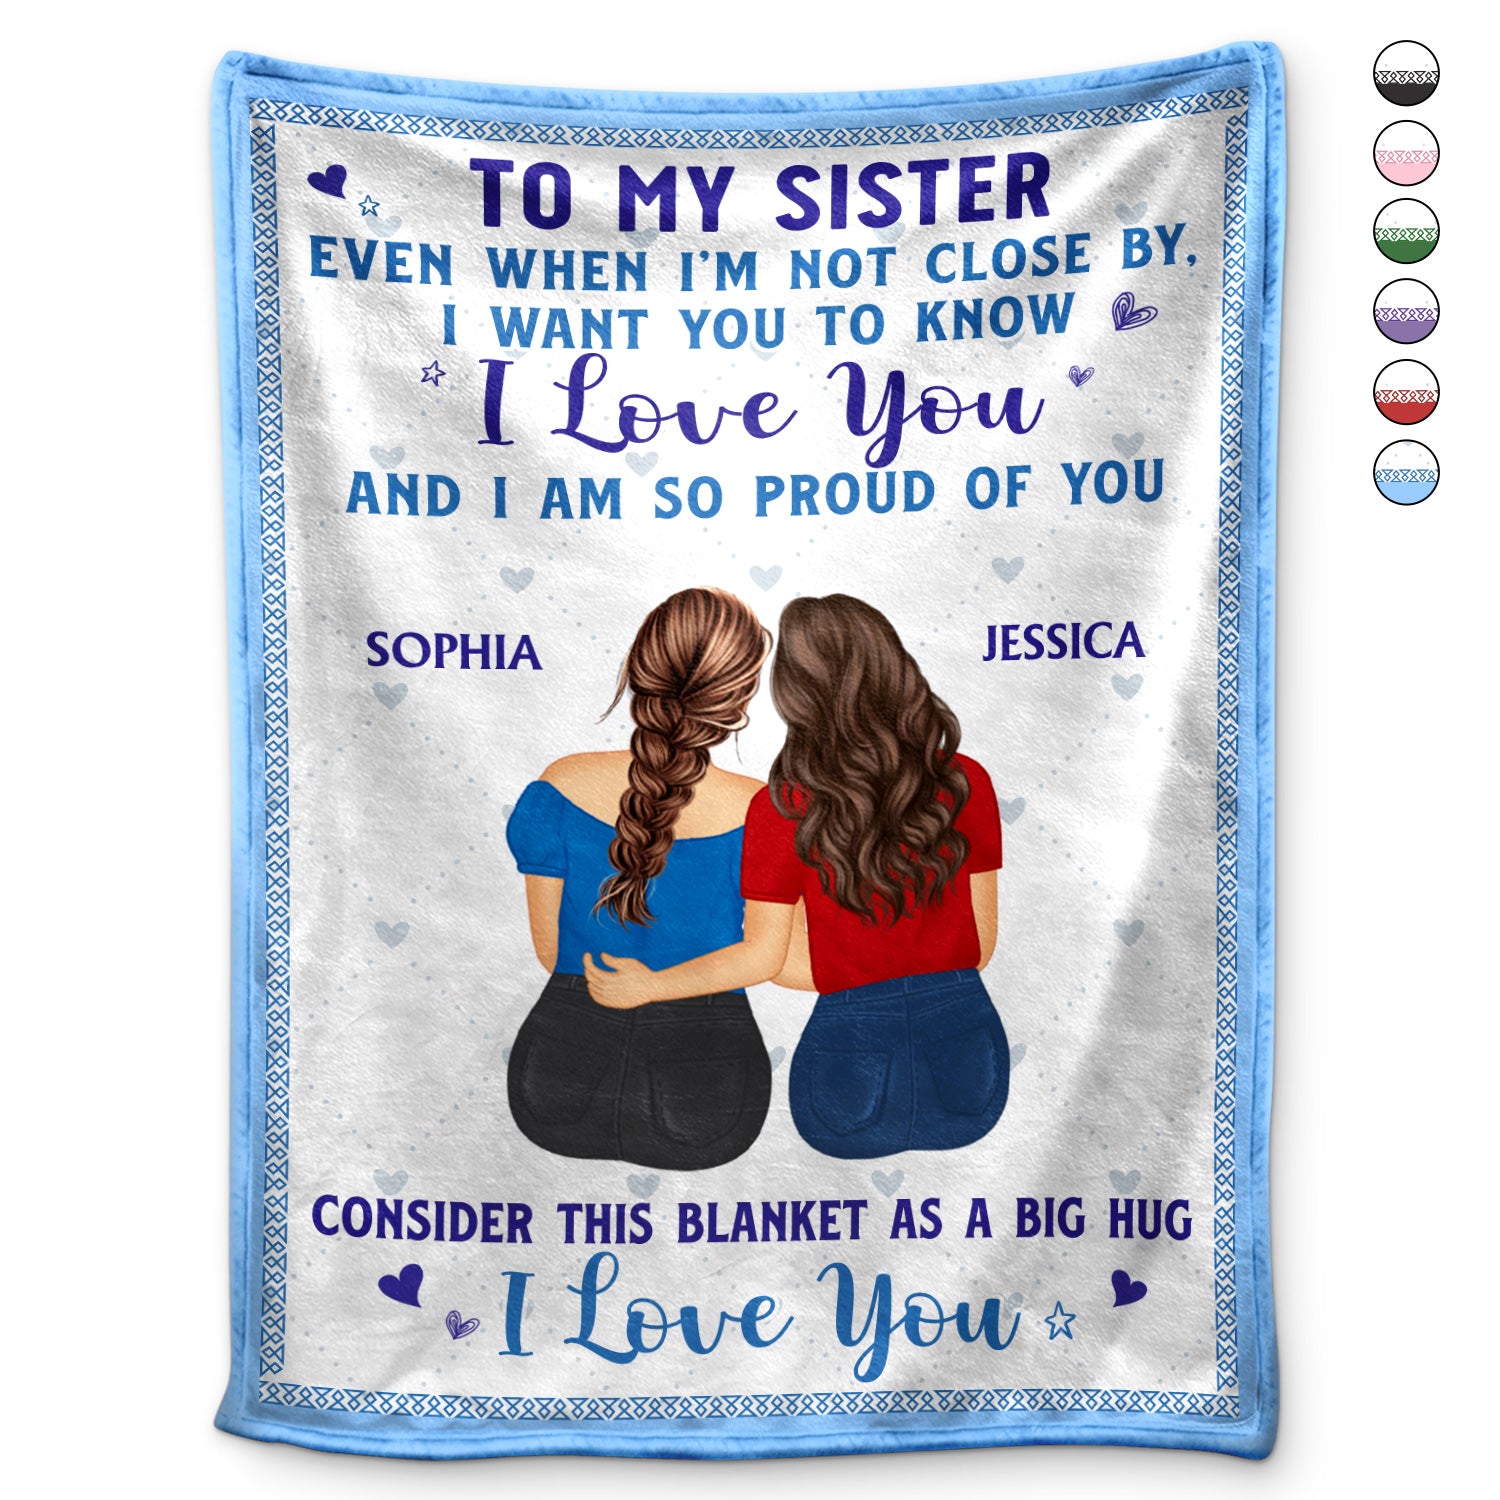 Even When I'm Not Close By - Gift For Sisters, Besties, Daughters - Personalized Fleece Blanket